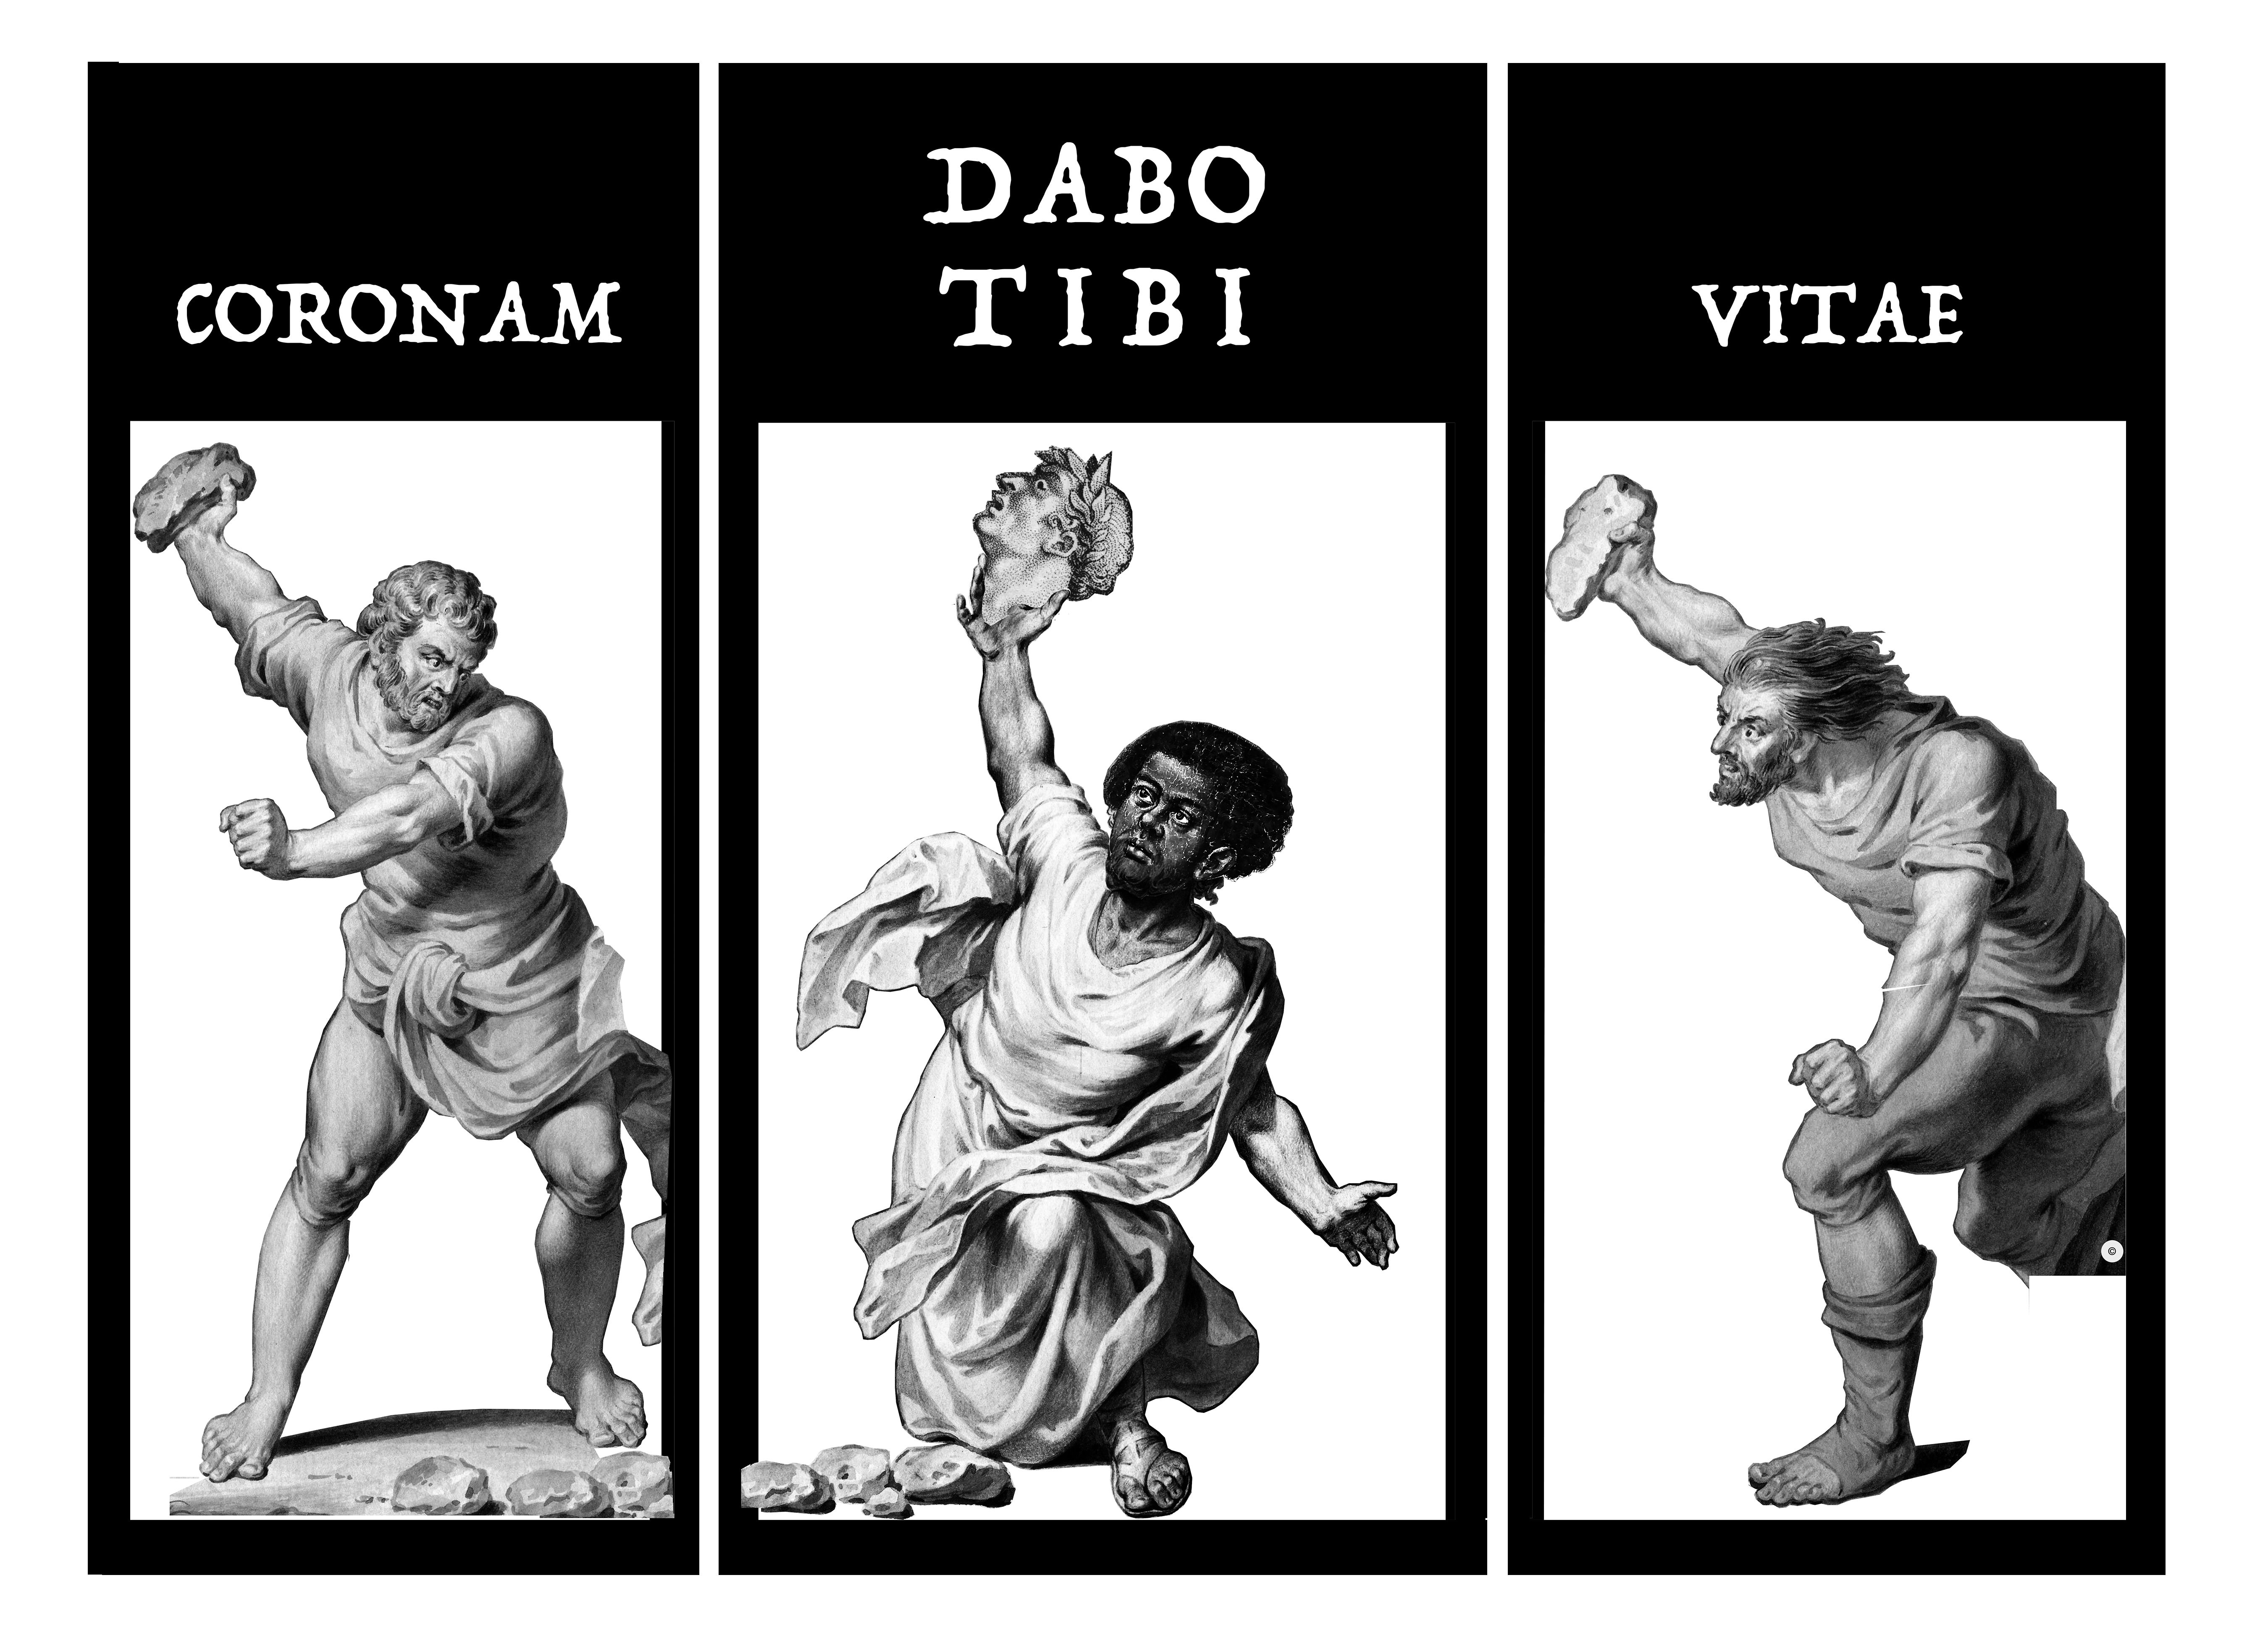 A triptych of Roman statues with the words “Coronam Dabo Tibi Vitae” above them. The center figure is Black; the other two white.